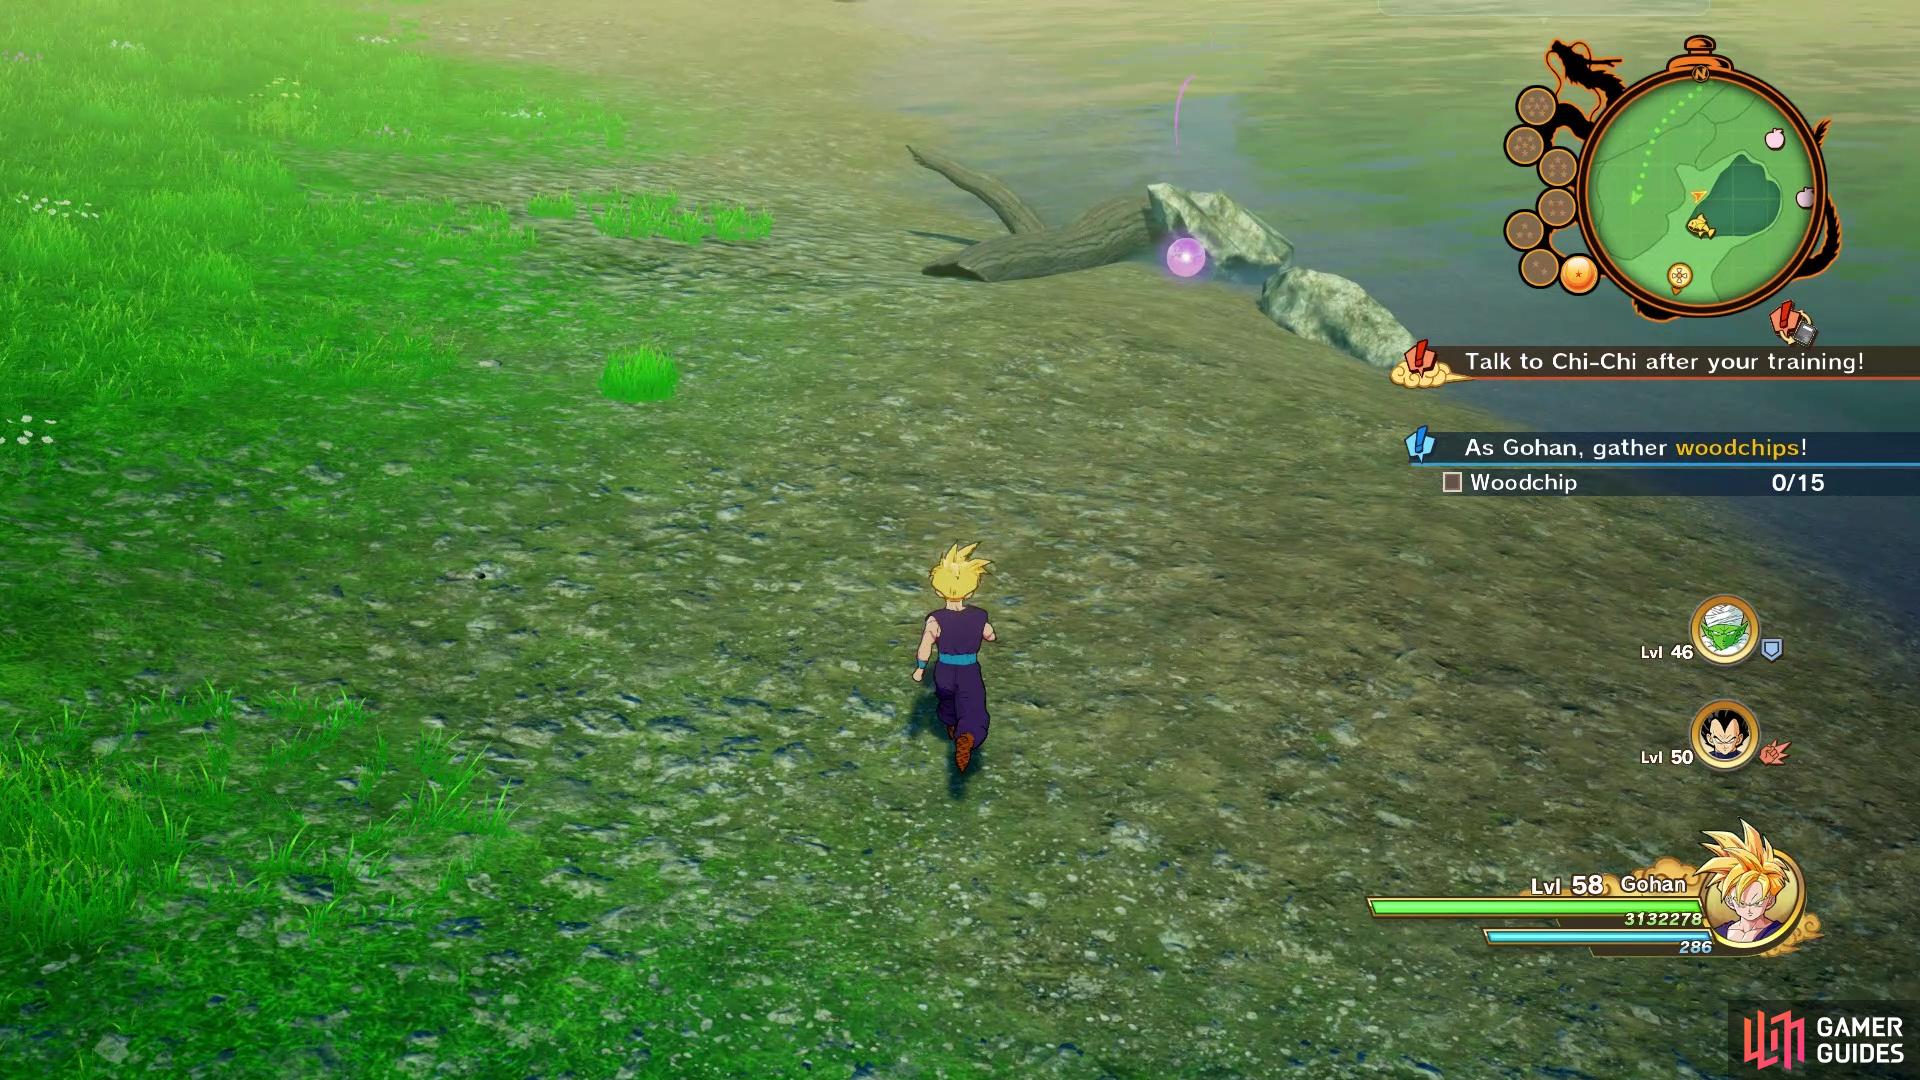 All of the purple orbs that contain Woodchips will be by dead/fallen logs